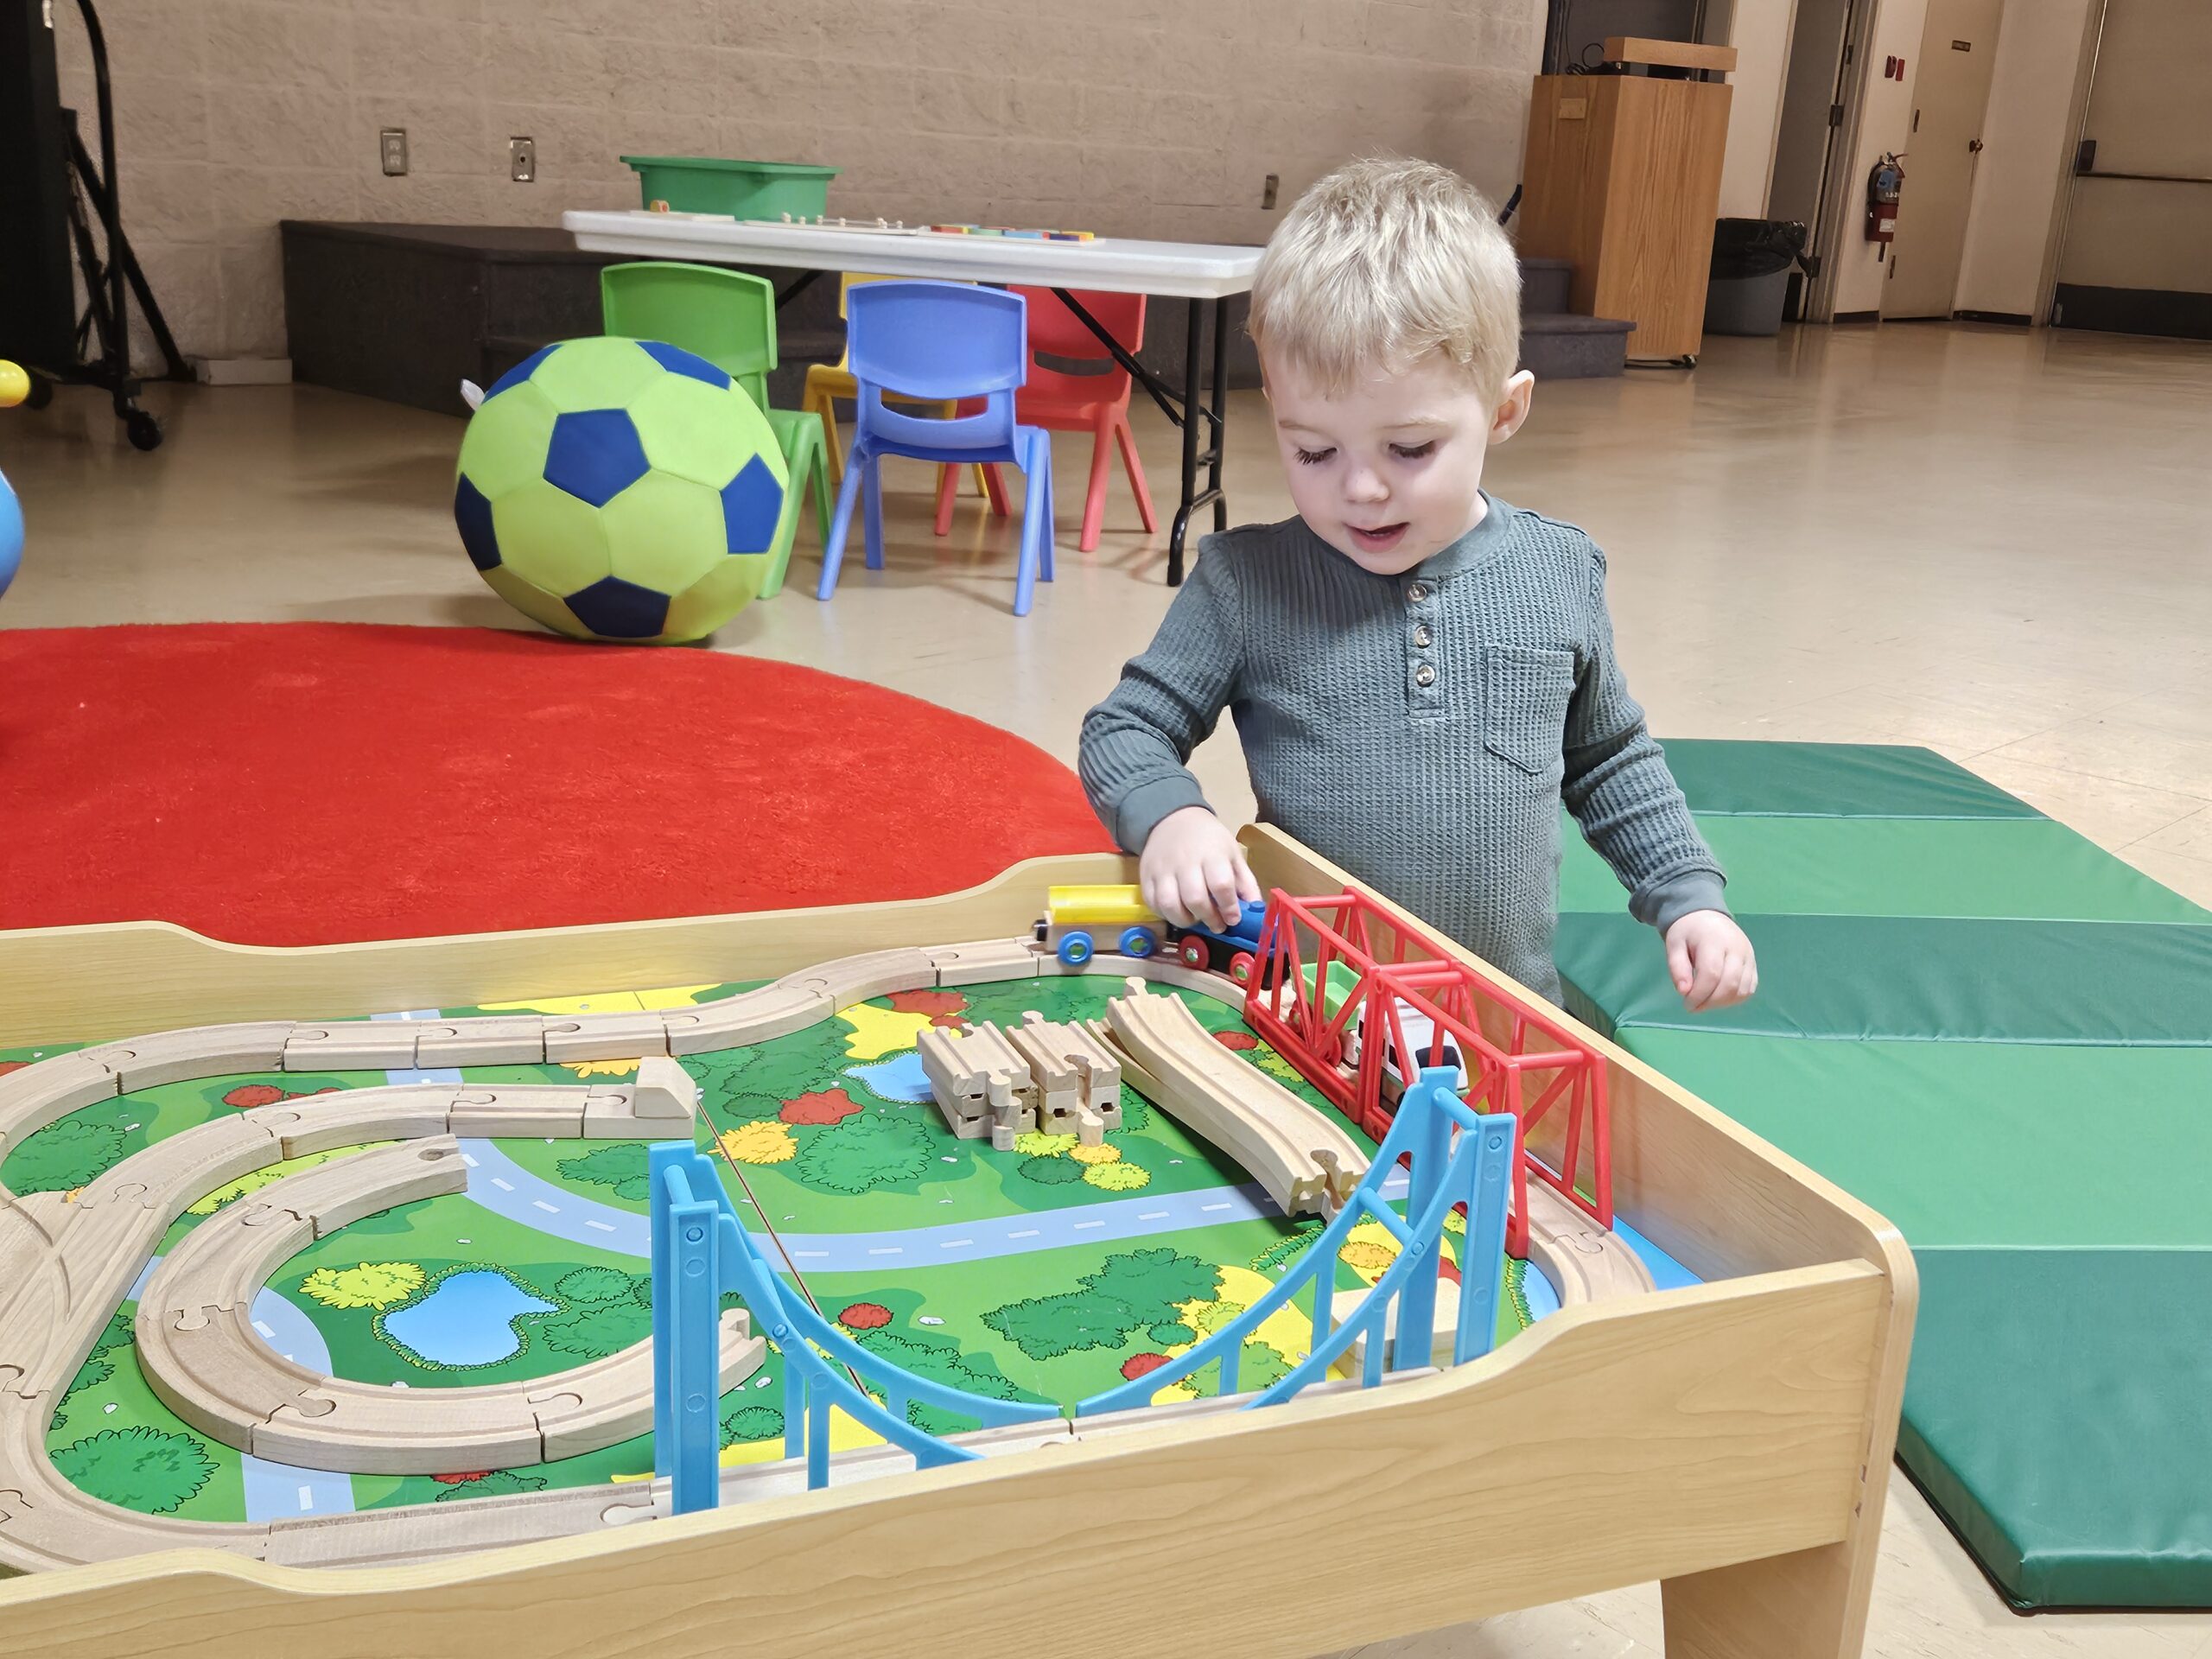 Child plays with toys at Edmonton Temple's Play Cafe